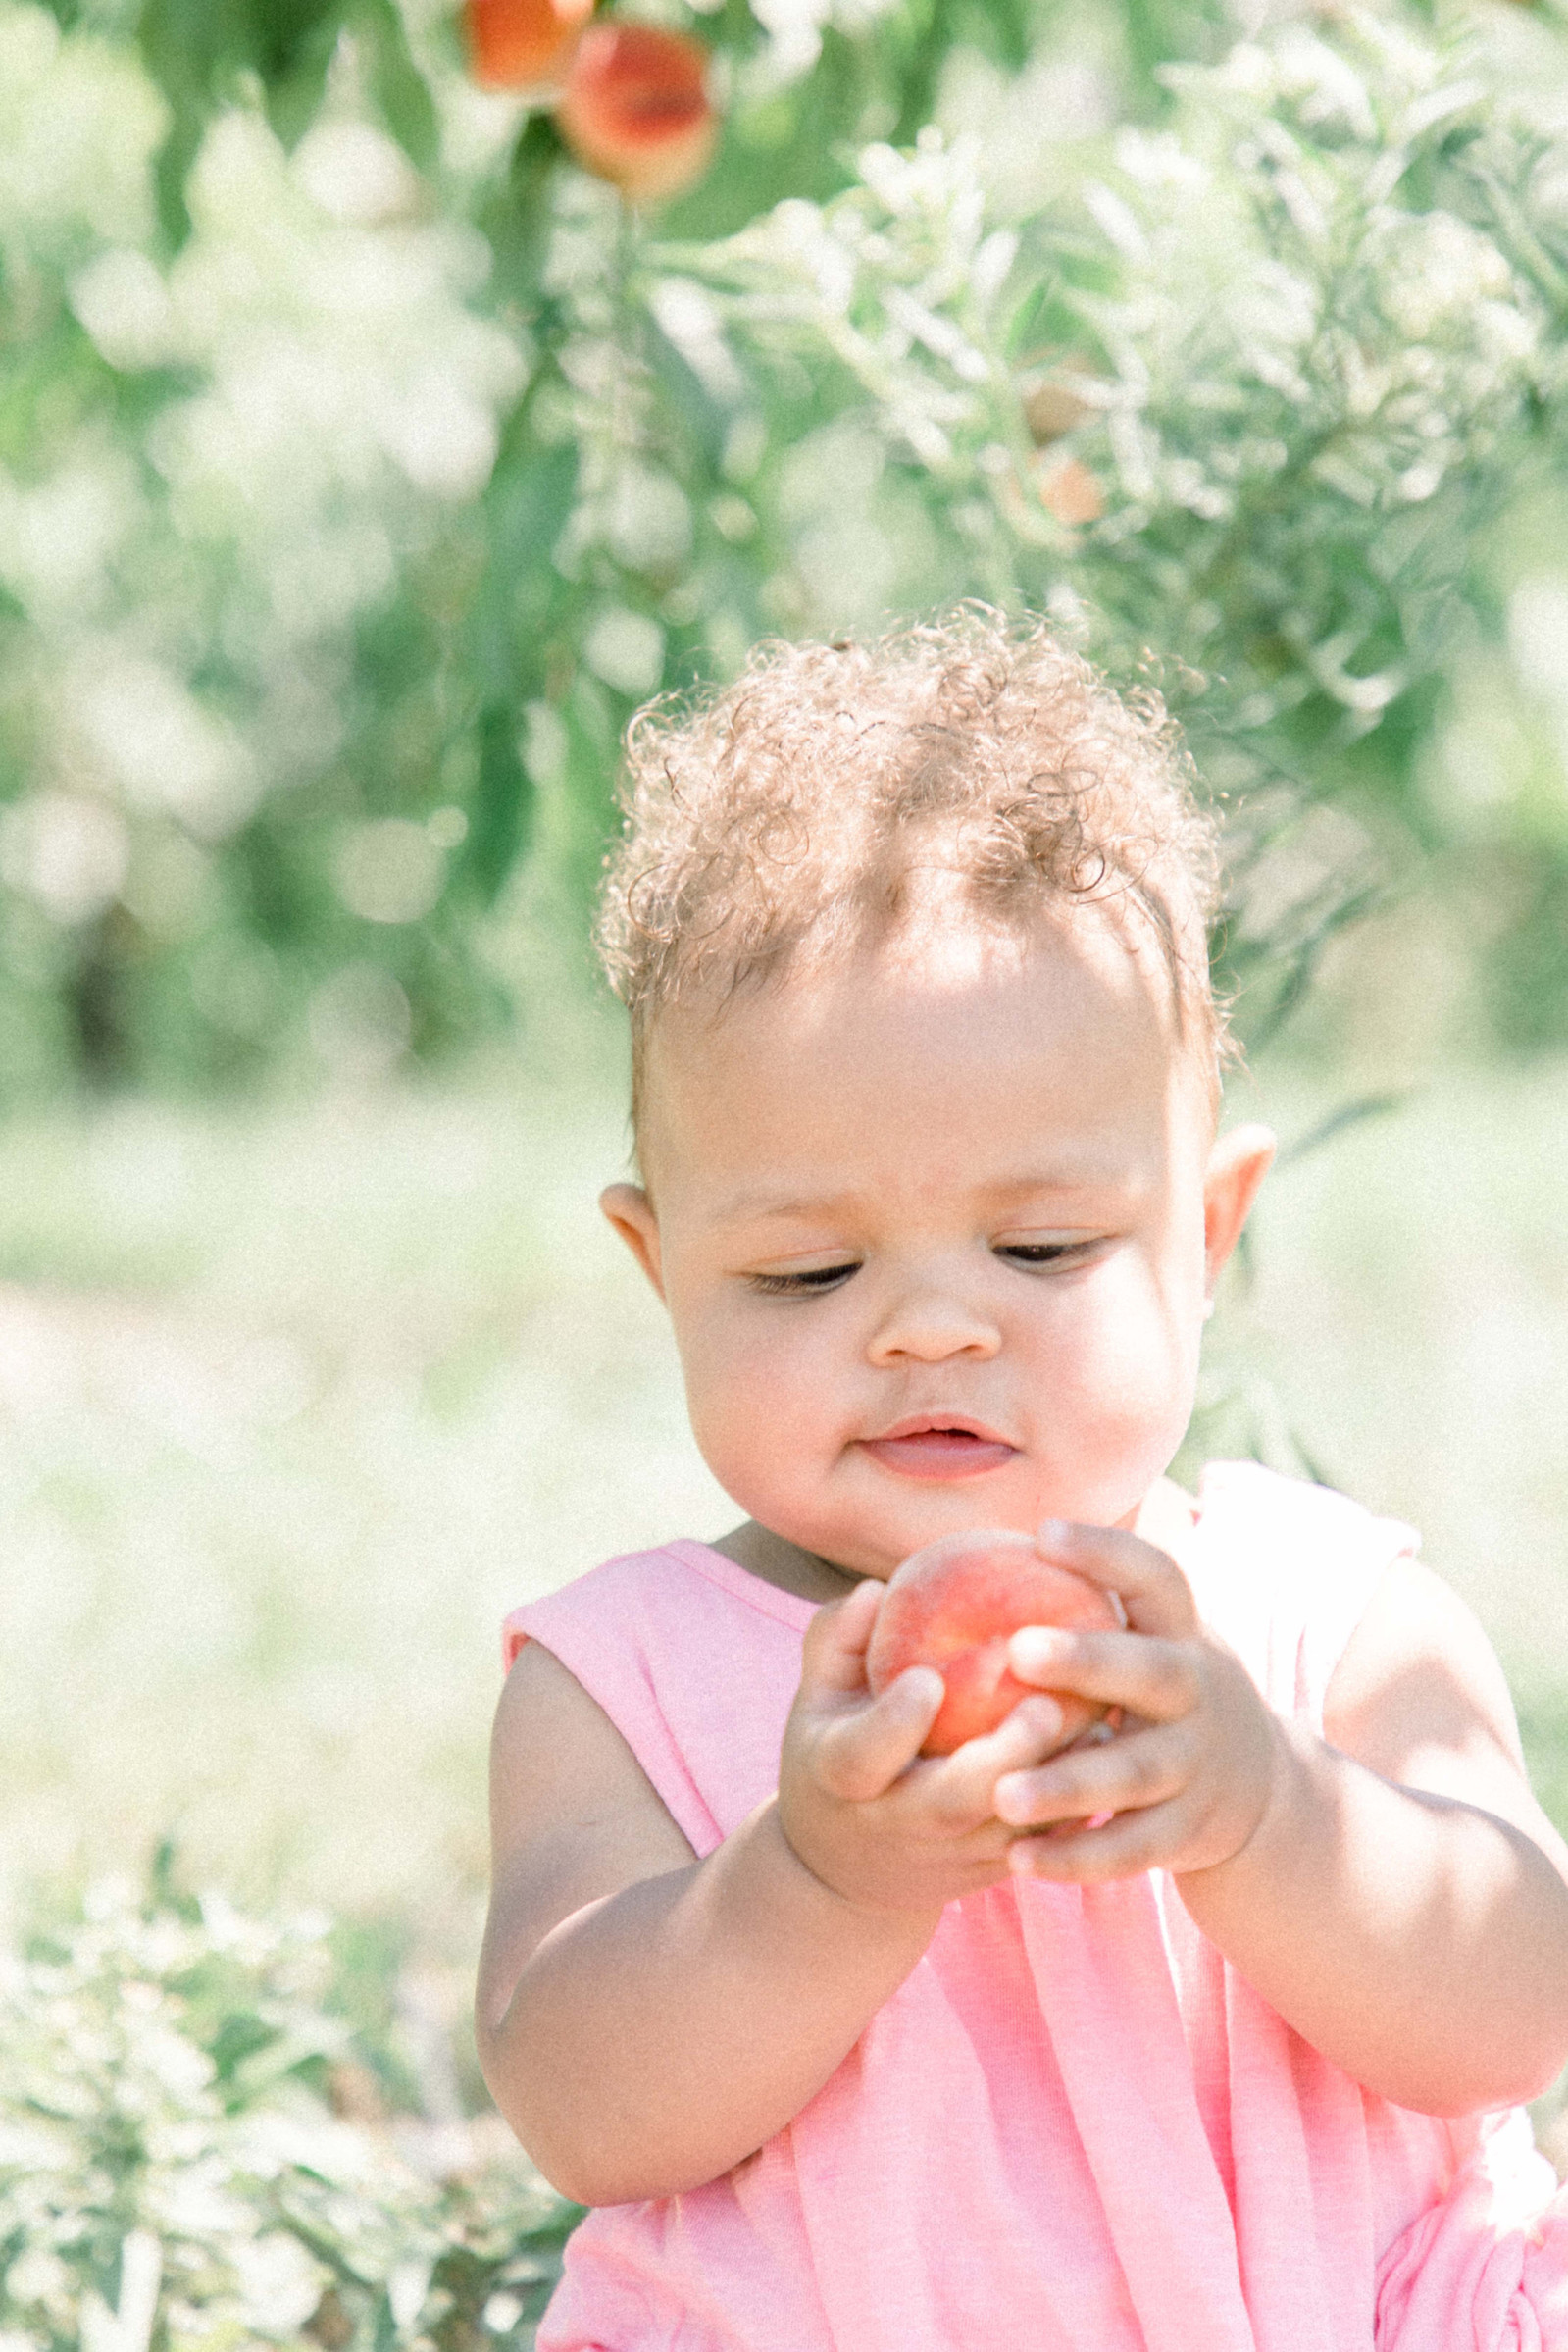 Portrait of baby girl sitting in a peach orchard playing with peach, Emily VanderBeek Photography, Portrait and Family photography, Niagara Photographer, Champlain Photographer, Vaudreuil-Soulanges Photographer, candid photography, authentic photography.